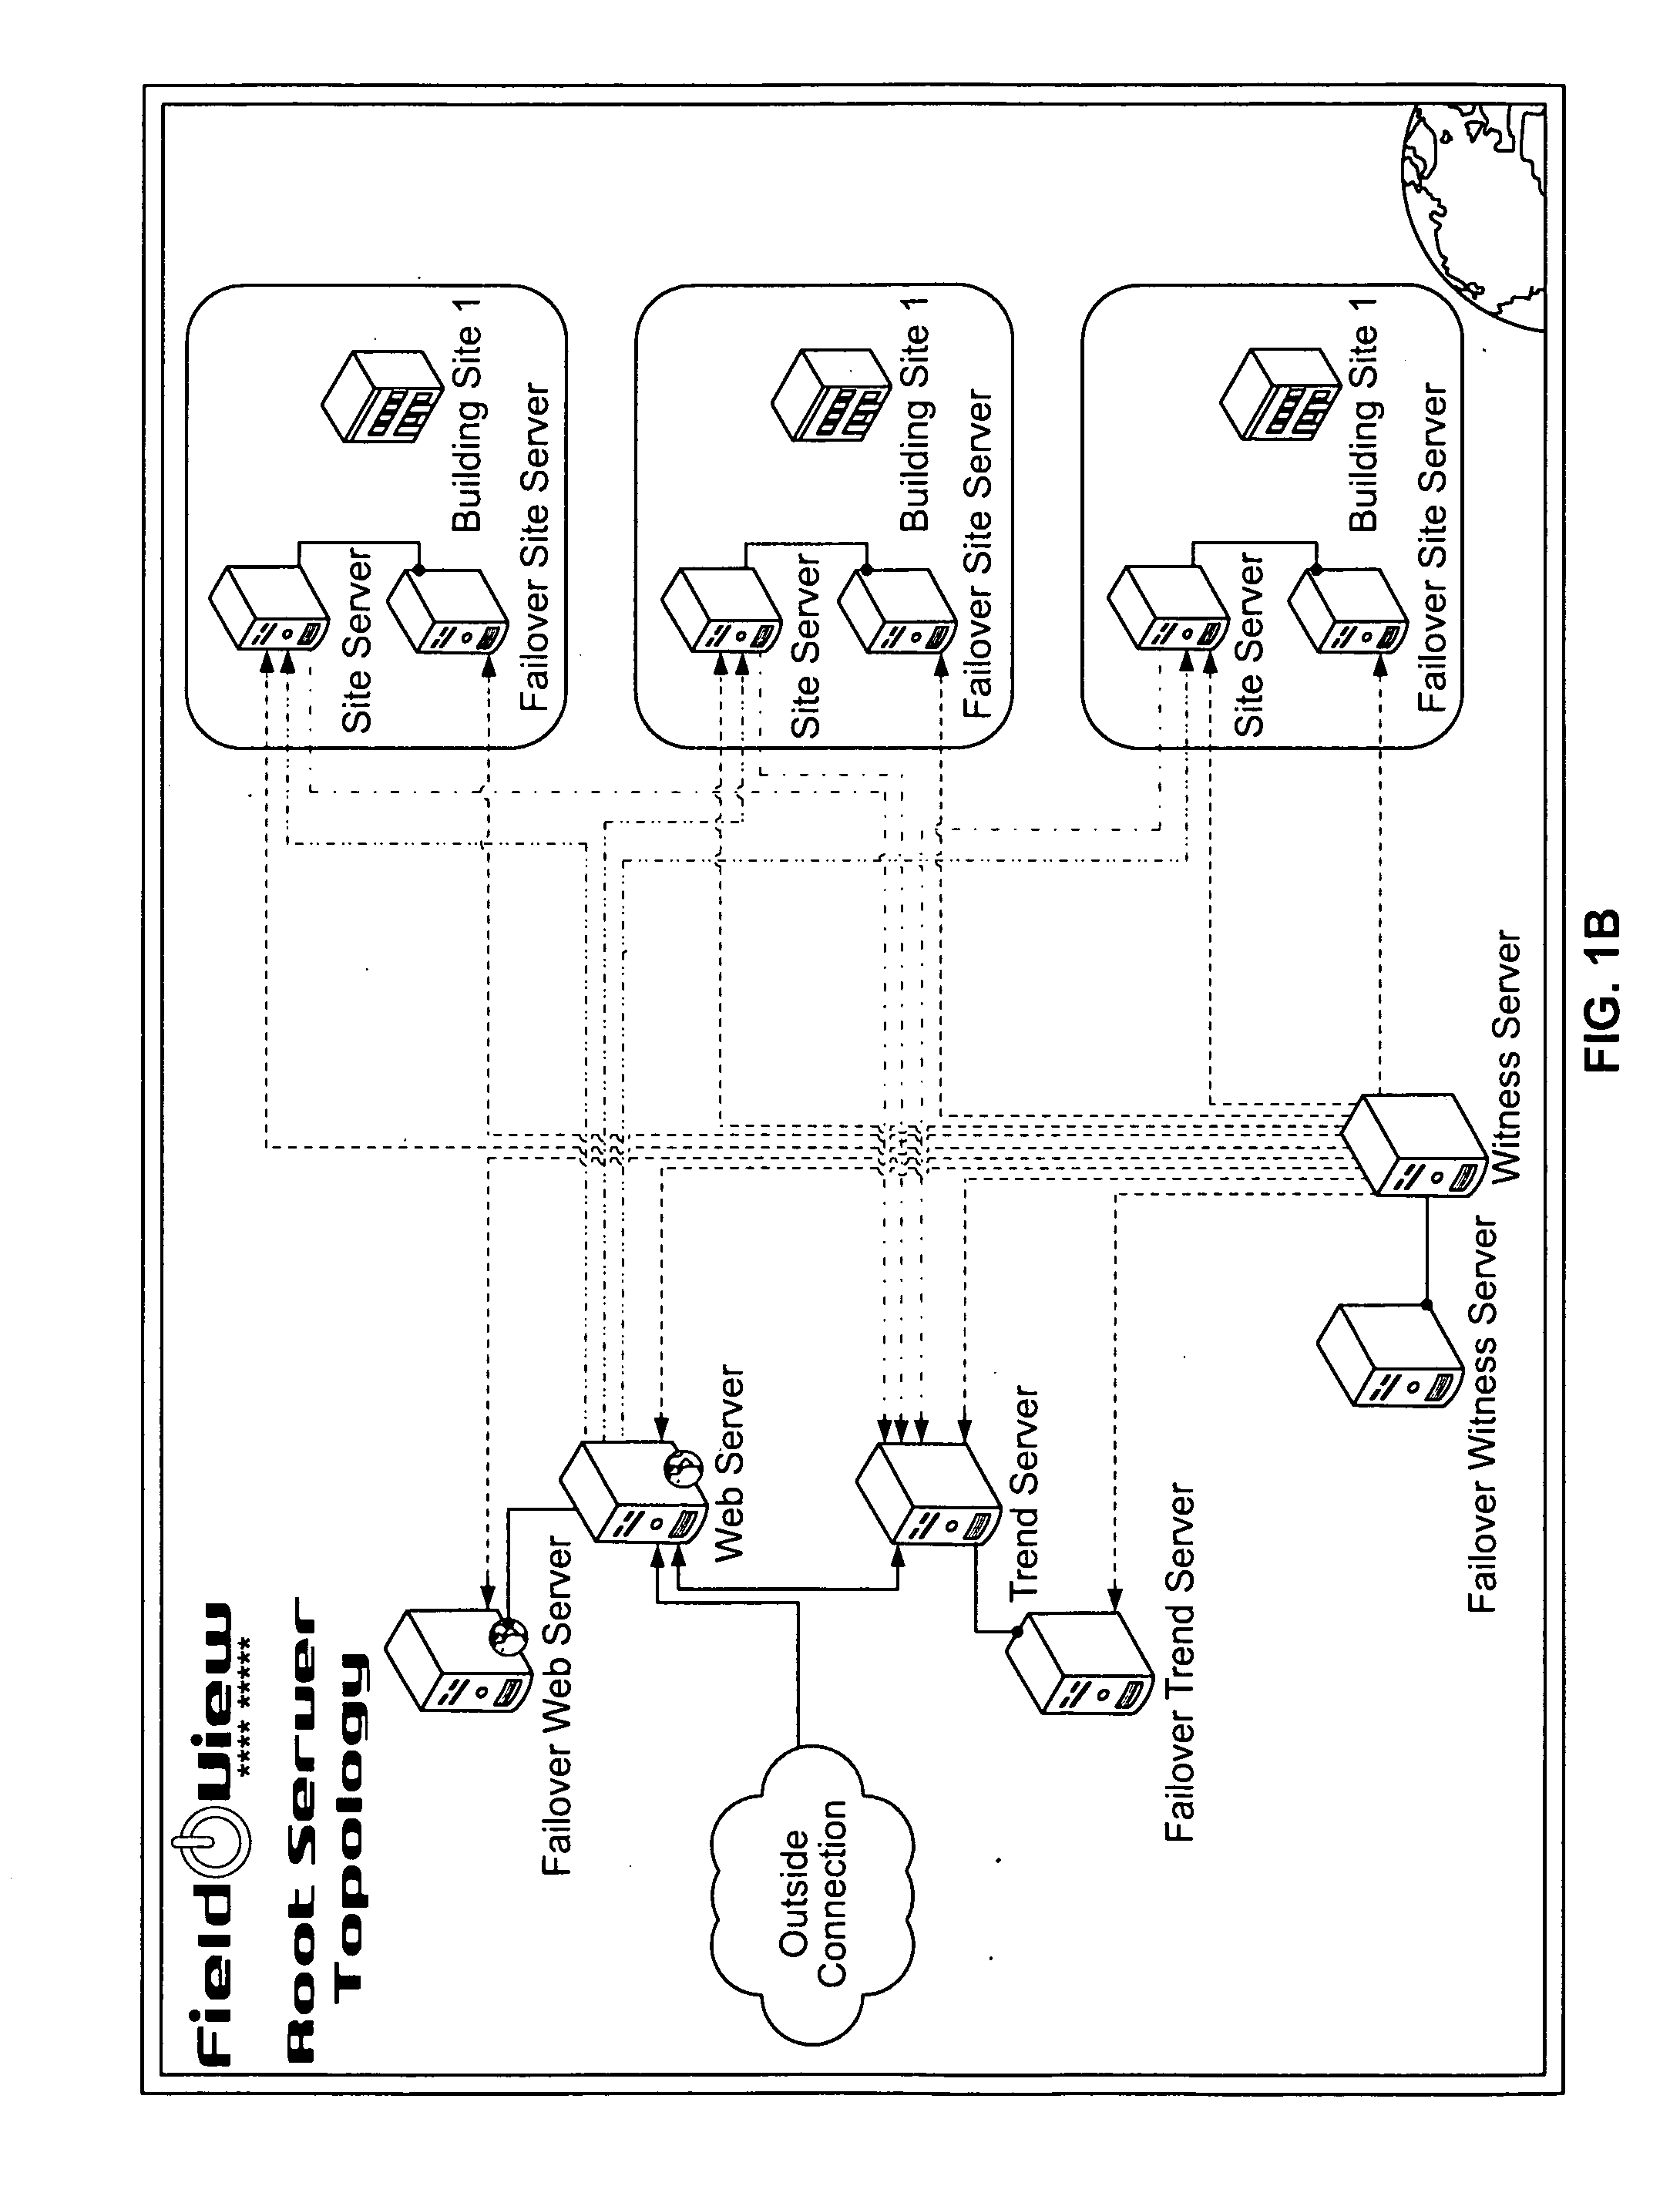 System and Method for Rack management and Capacity Planning